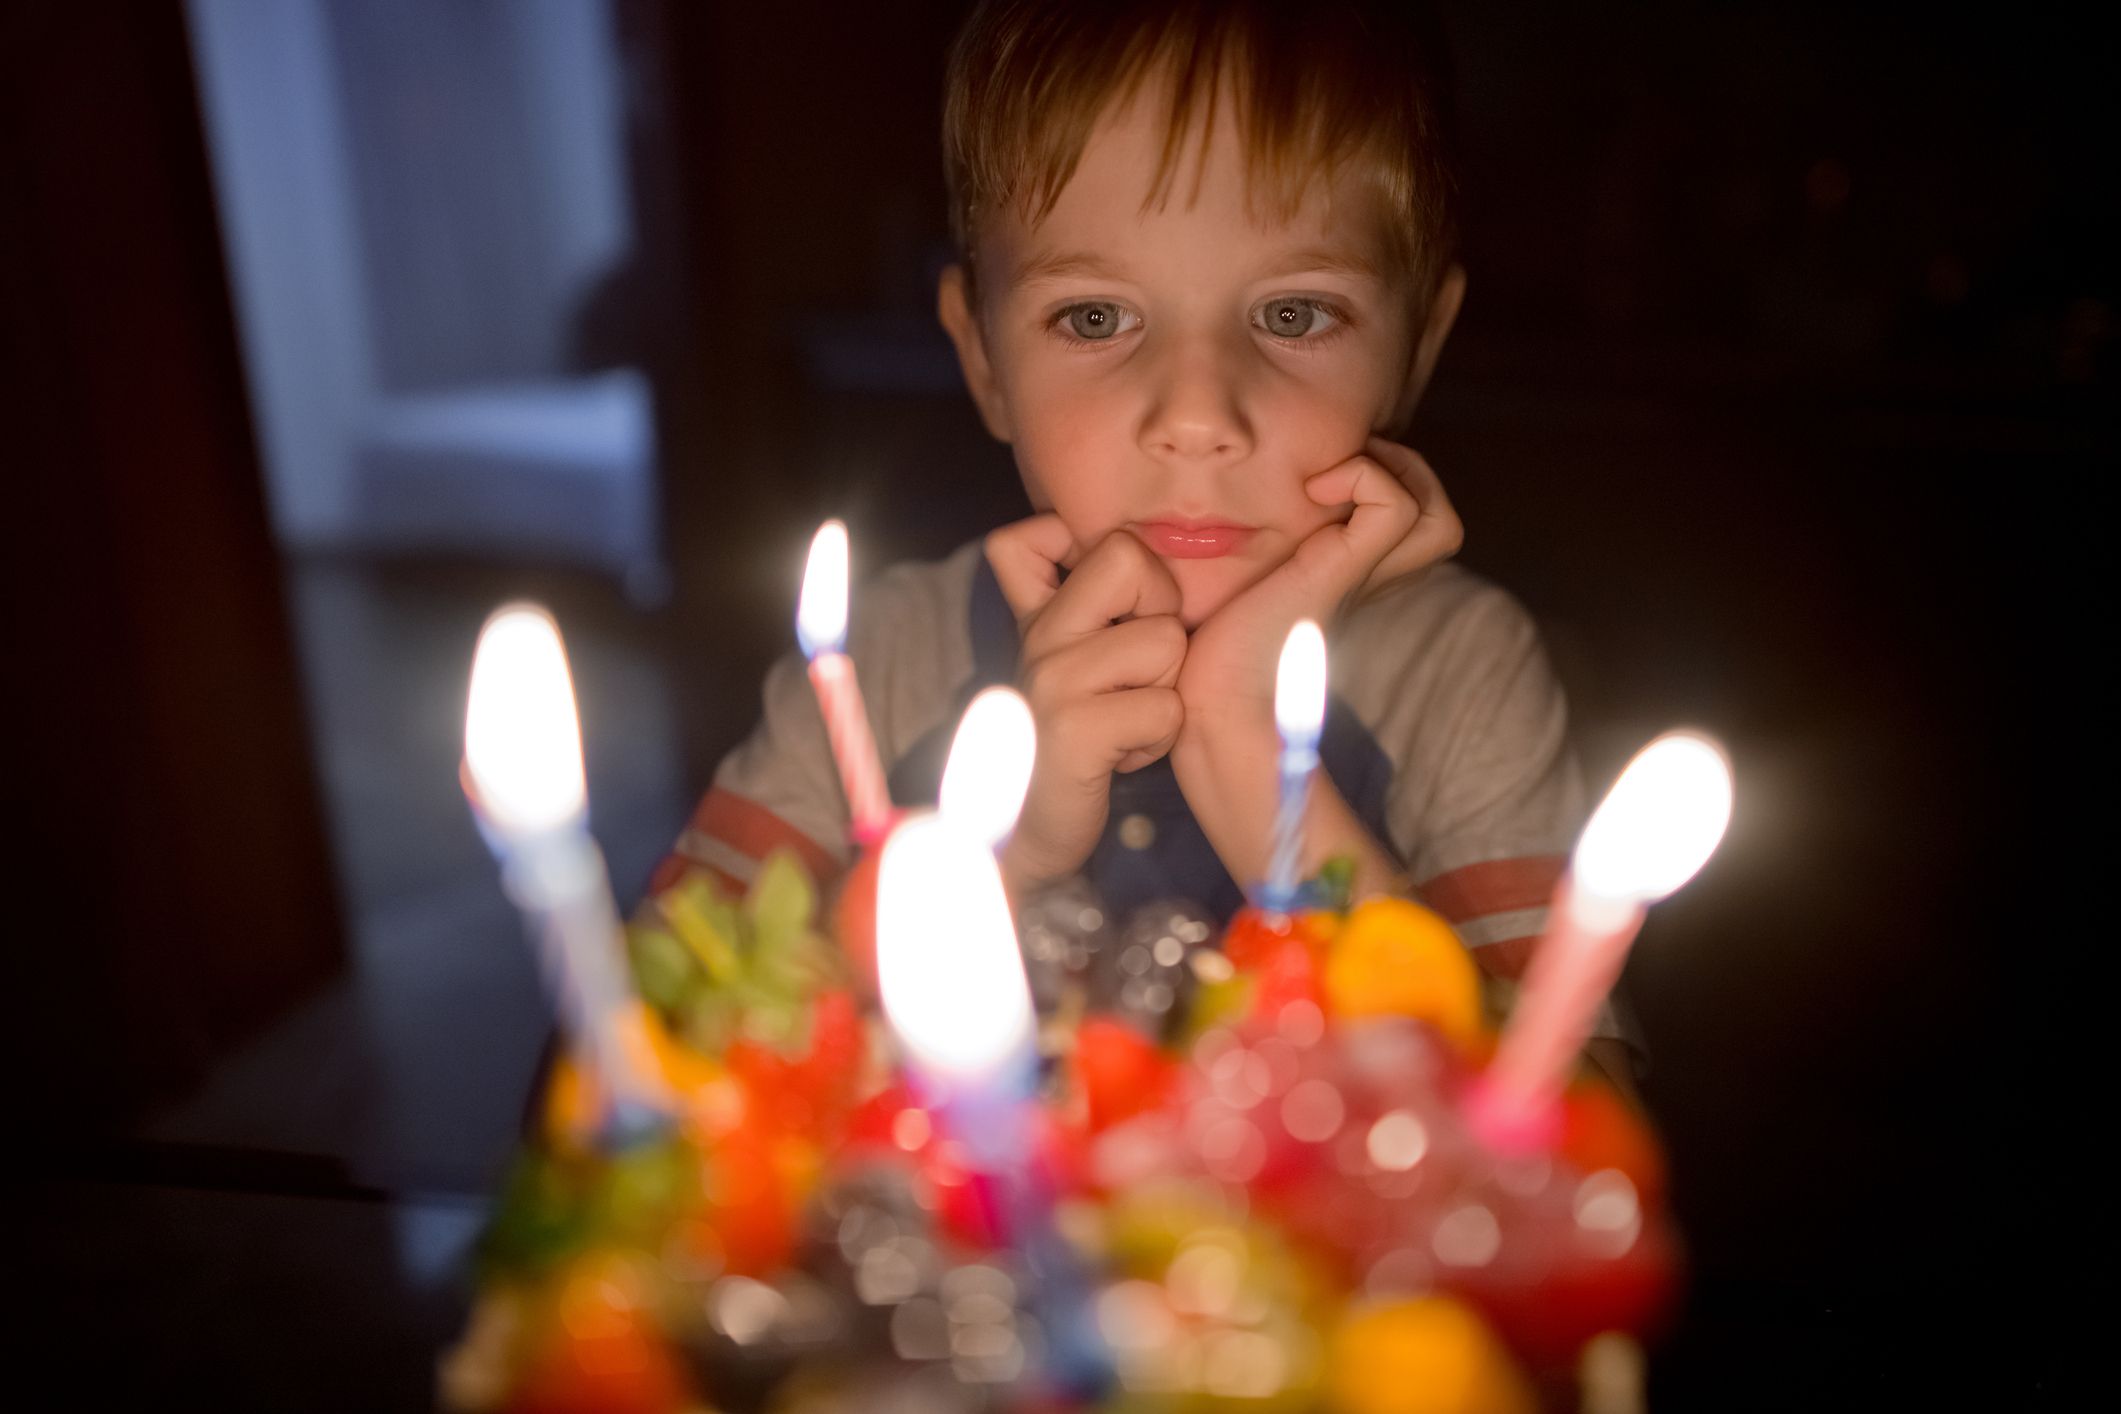 A little boy looking at a birthday cake. | Source: Getty Images